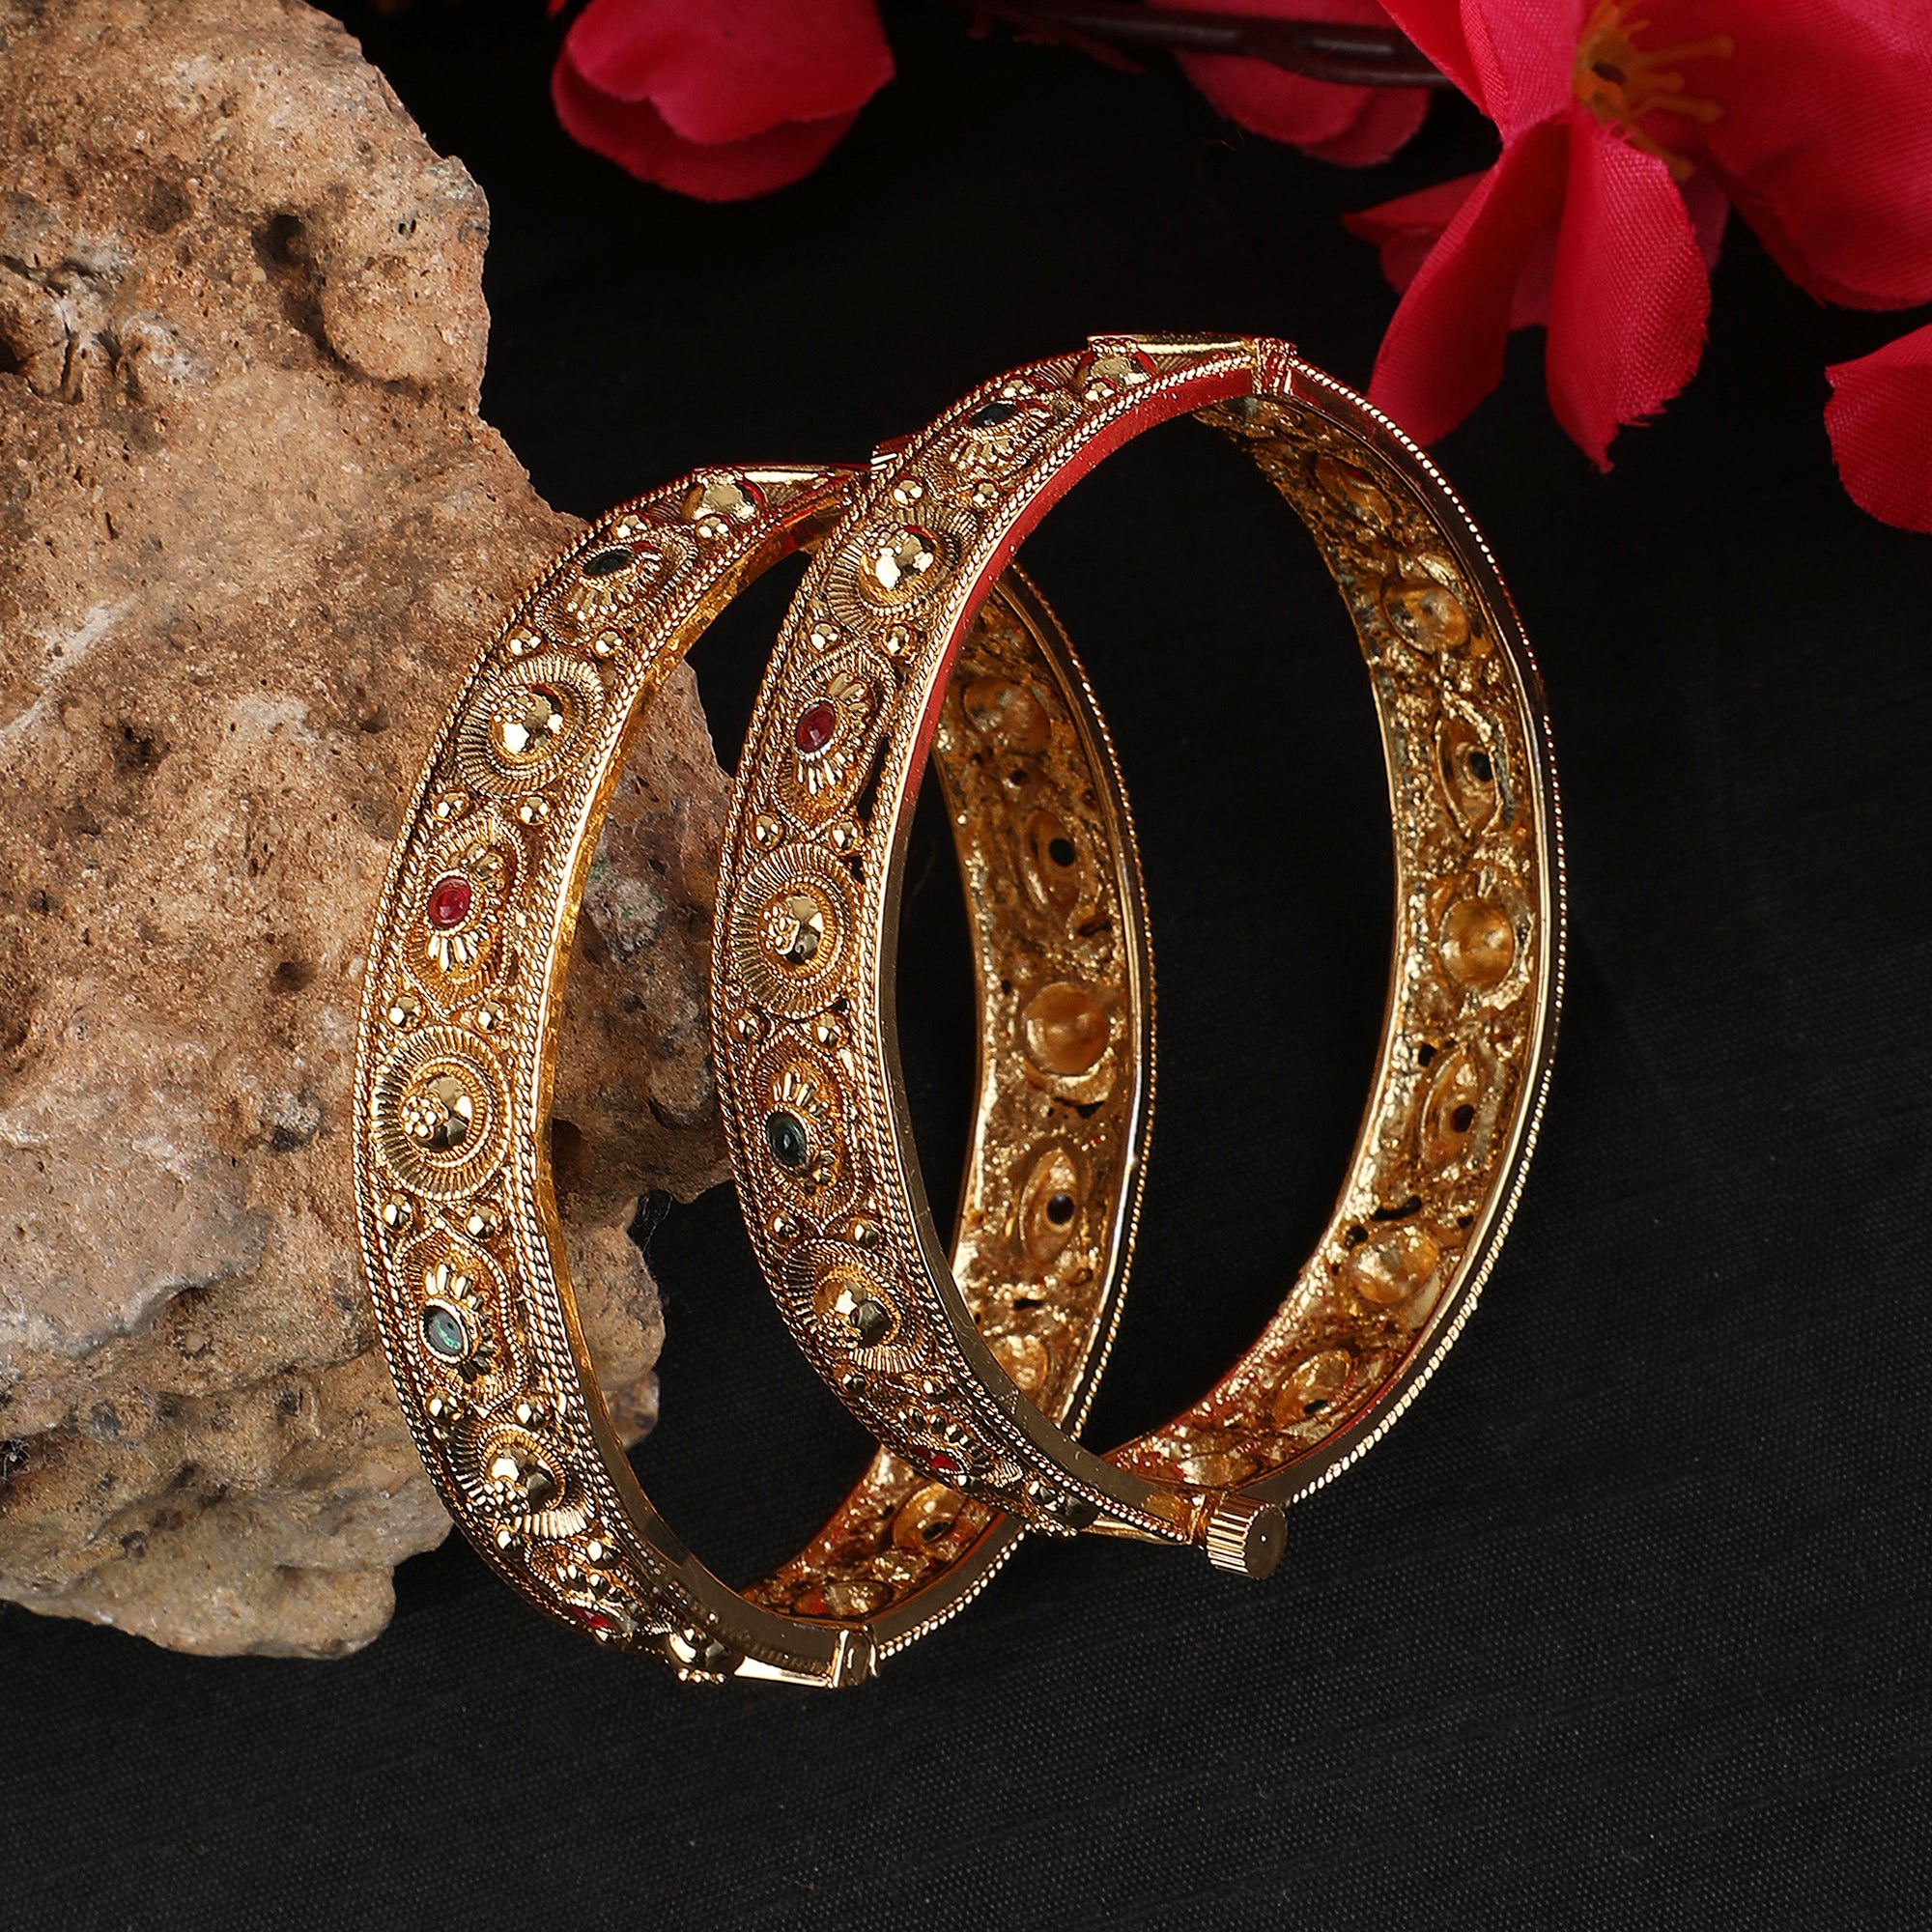 Women's Set Of 2 24K Gold-Plated & Pink Stone-Studded Hand Crafted Filigree Bangles - Anikas Creation